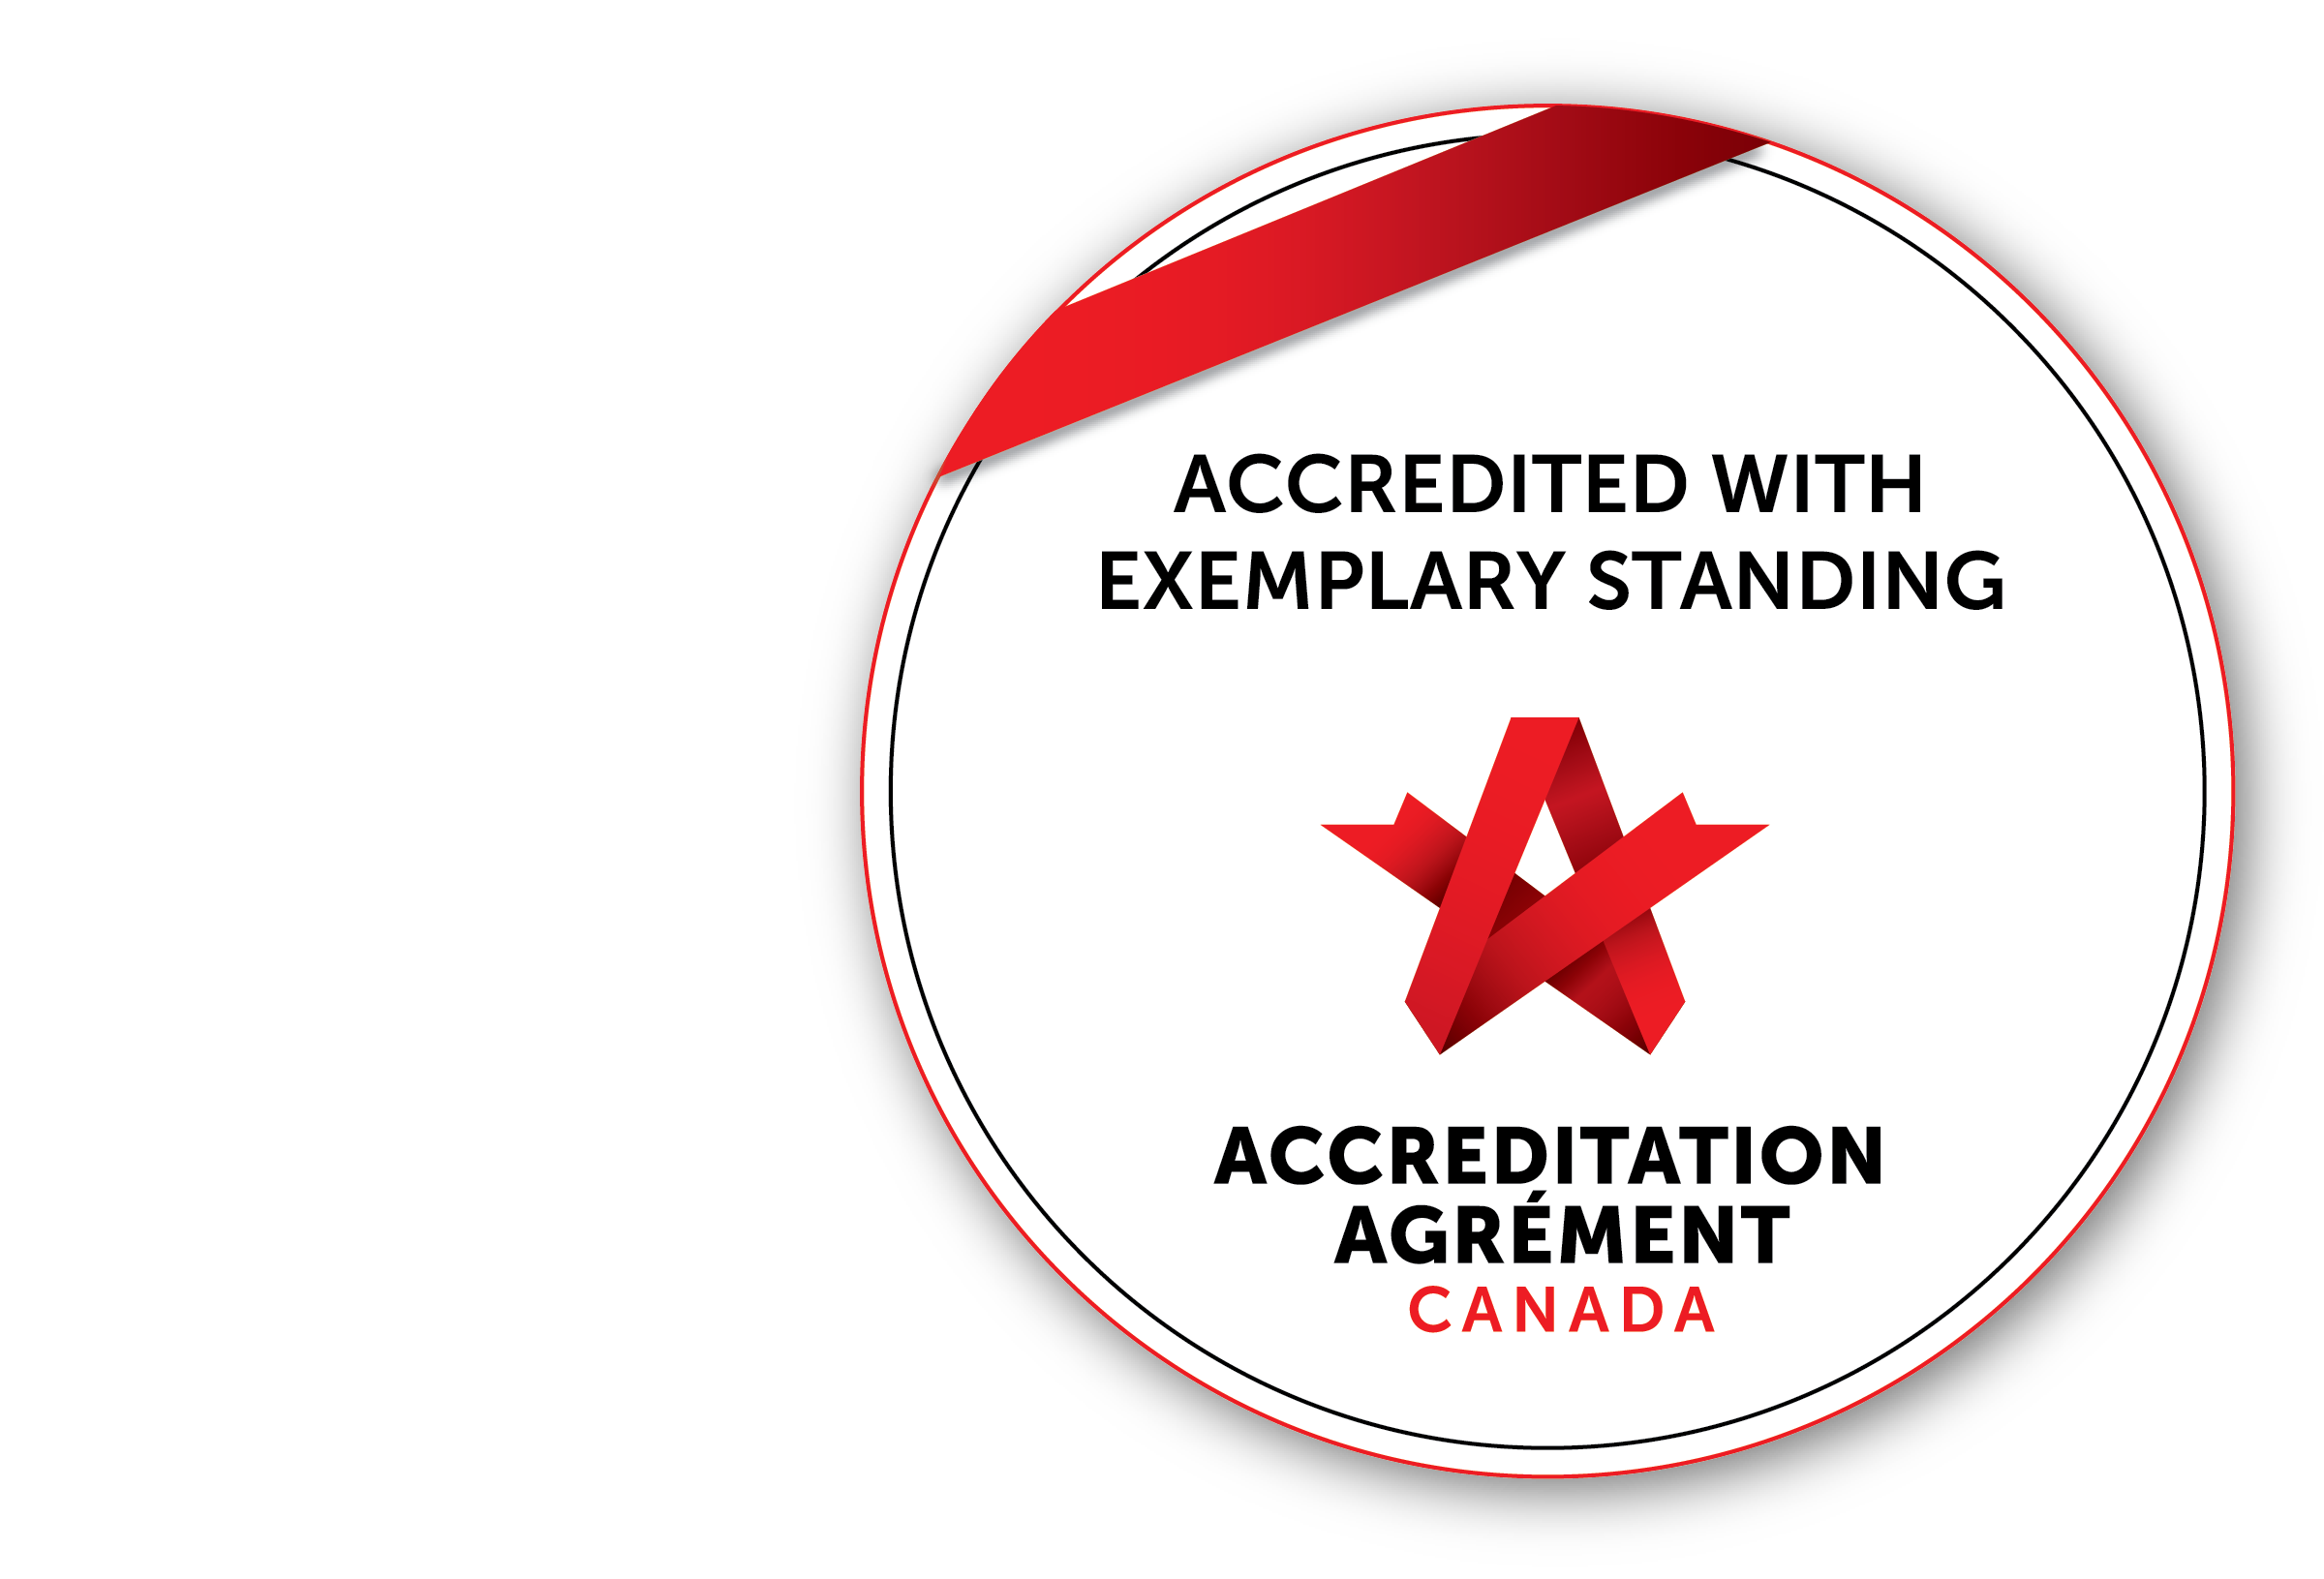 ACCREDITATION, What does Accreditation mean at Addiction Rehab Toronto?